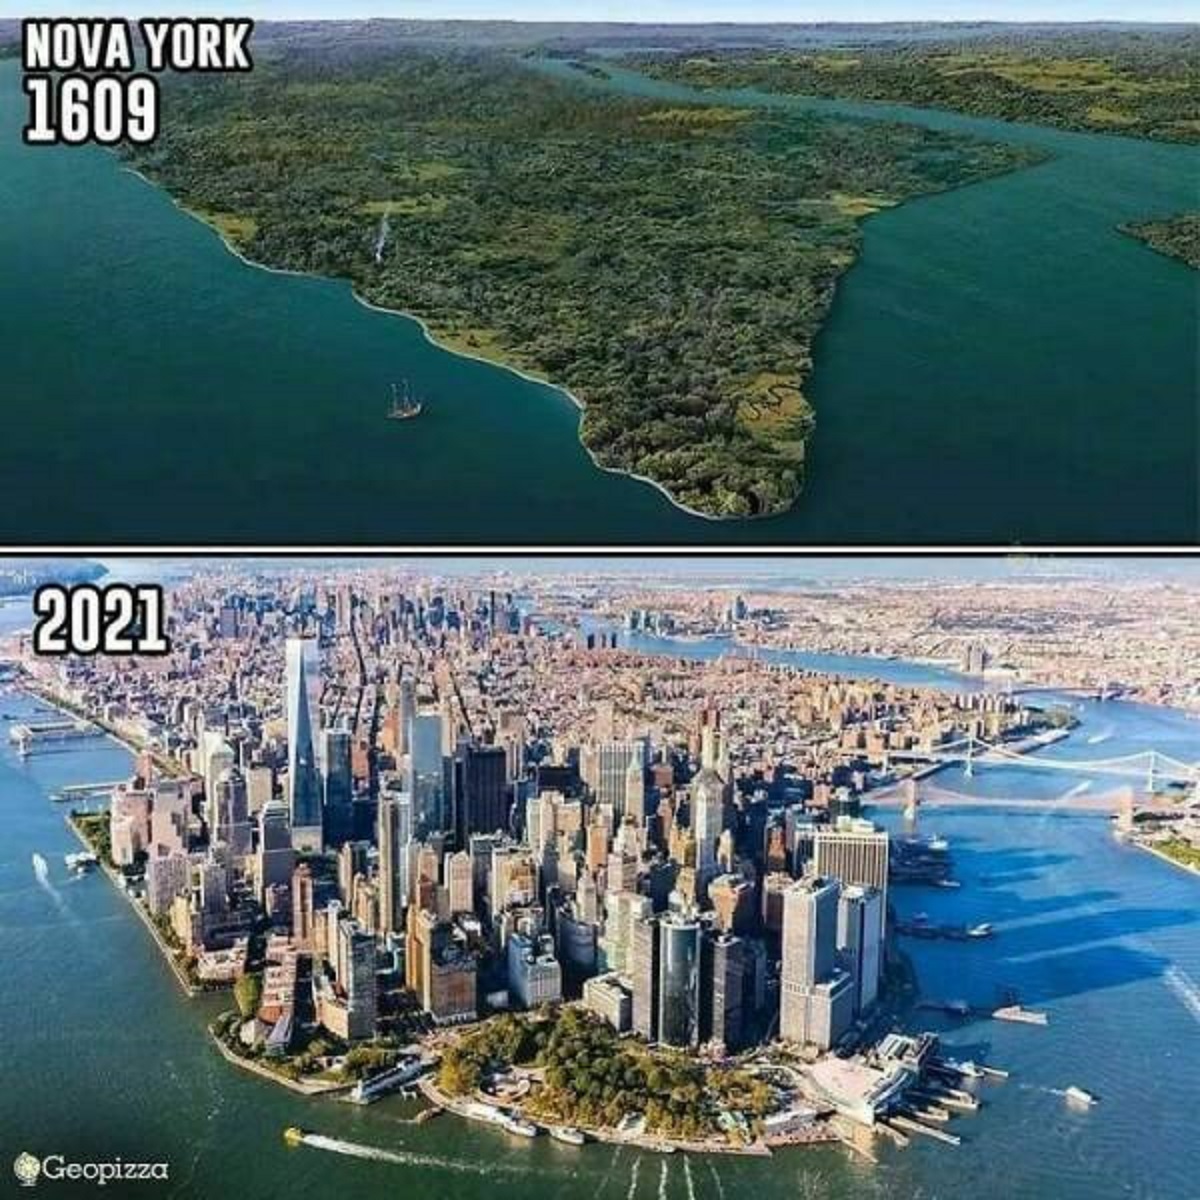 "Digital Reconstruction Of Untouched Manhattan, New York, In Year 1609, In Comparison To Year 2021"